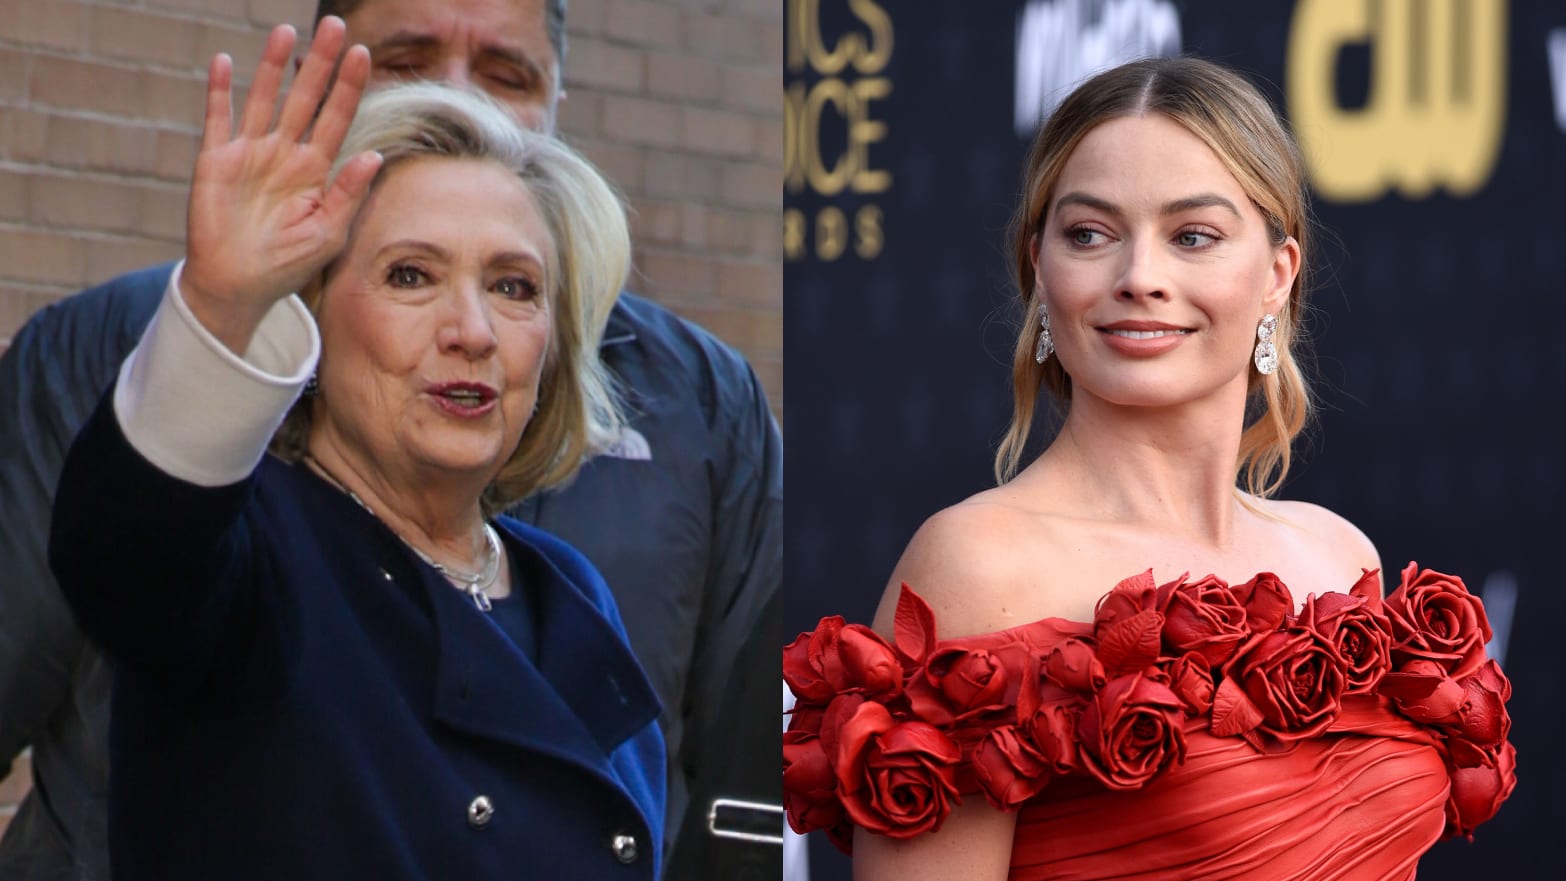 hillary-clinton-voices-support-for-margot-robbie-and-greta-gerwig-after-barbie-snub